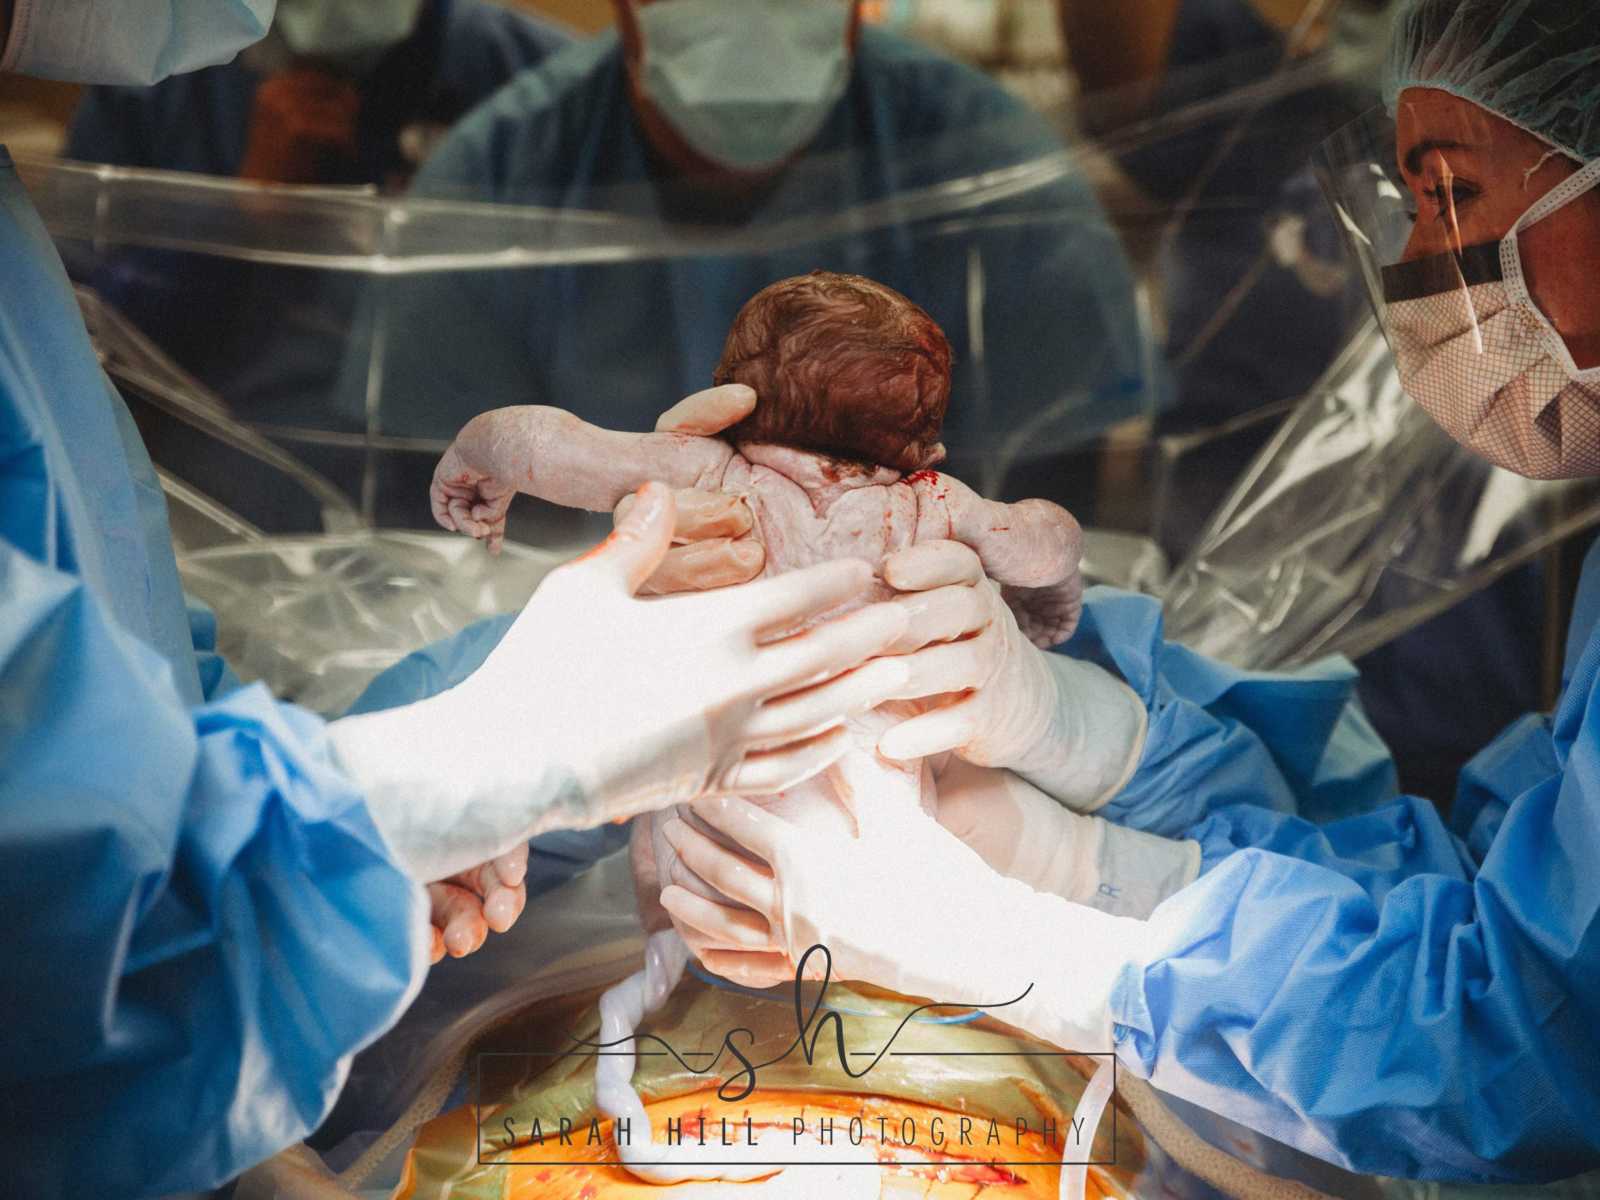 Nurses holding up newborn c-section baby whose umbilical chord is still attached